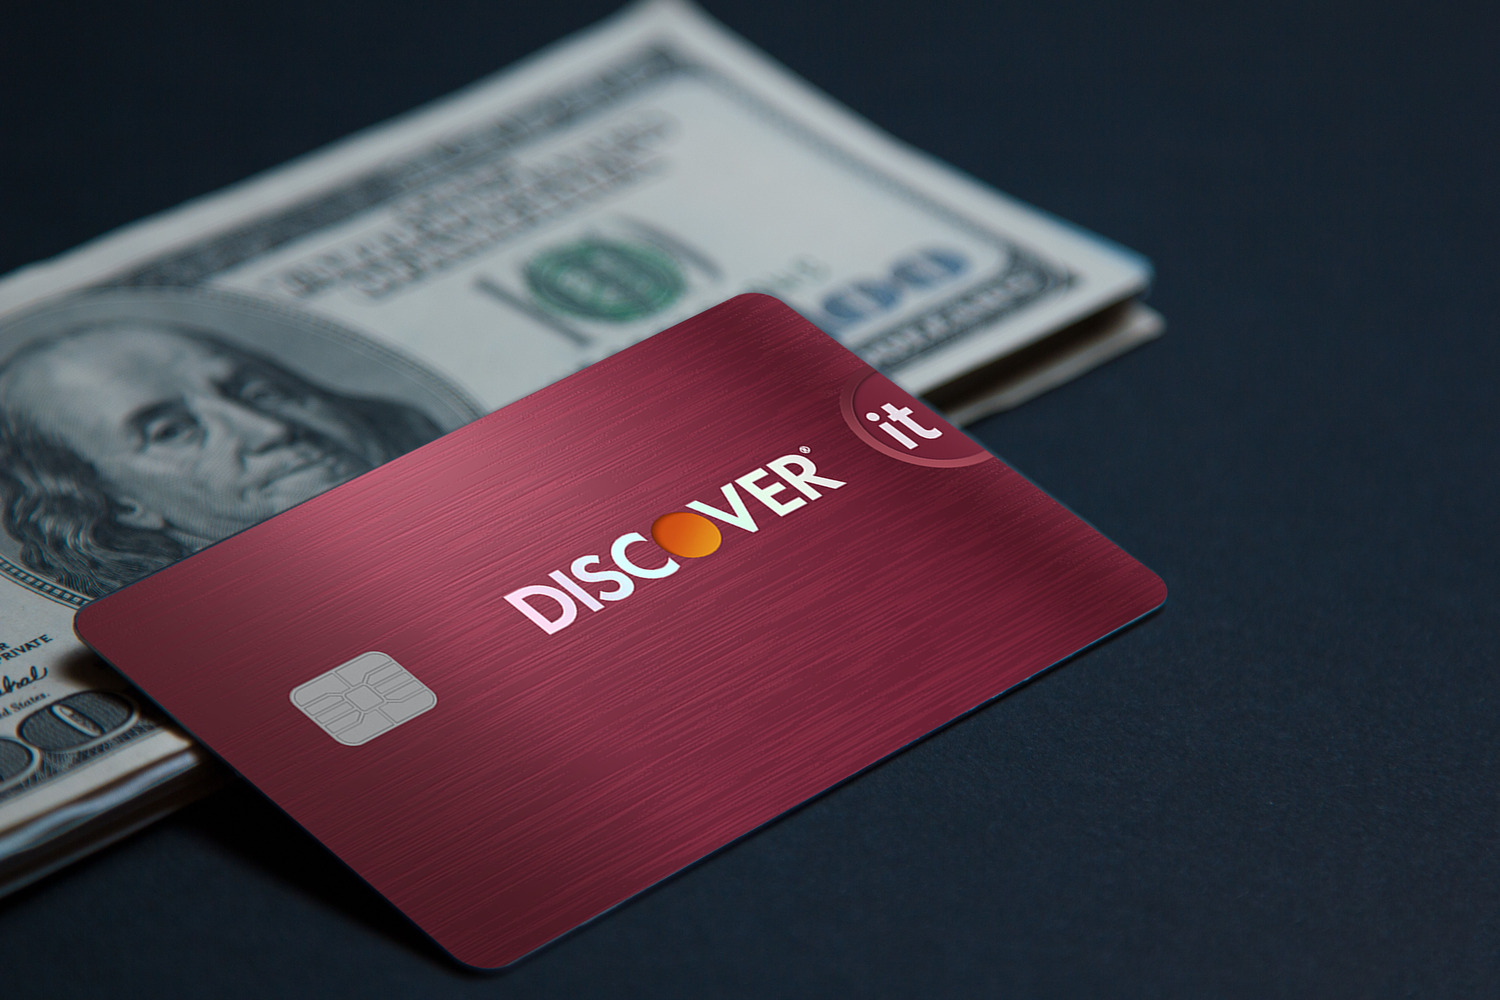 What Credit Score is Needed For The Discover It CashBack Card?